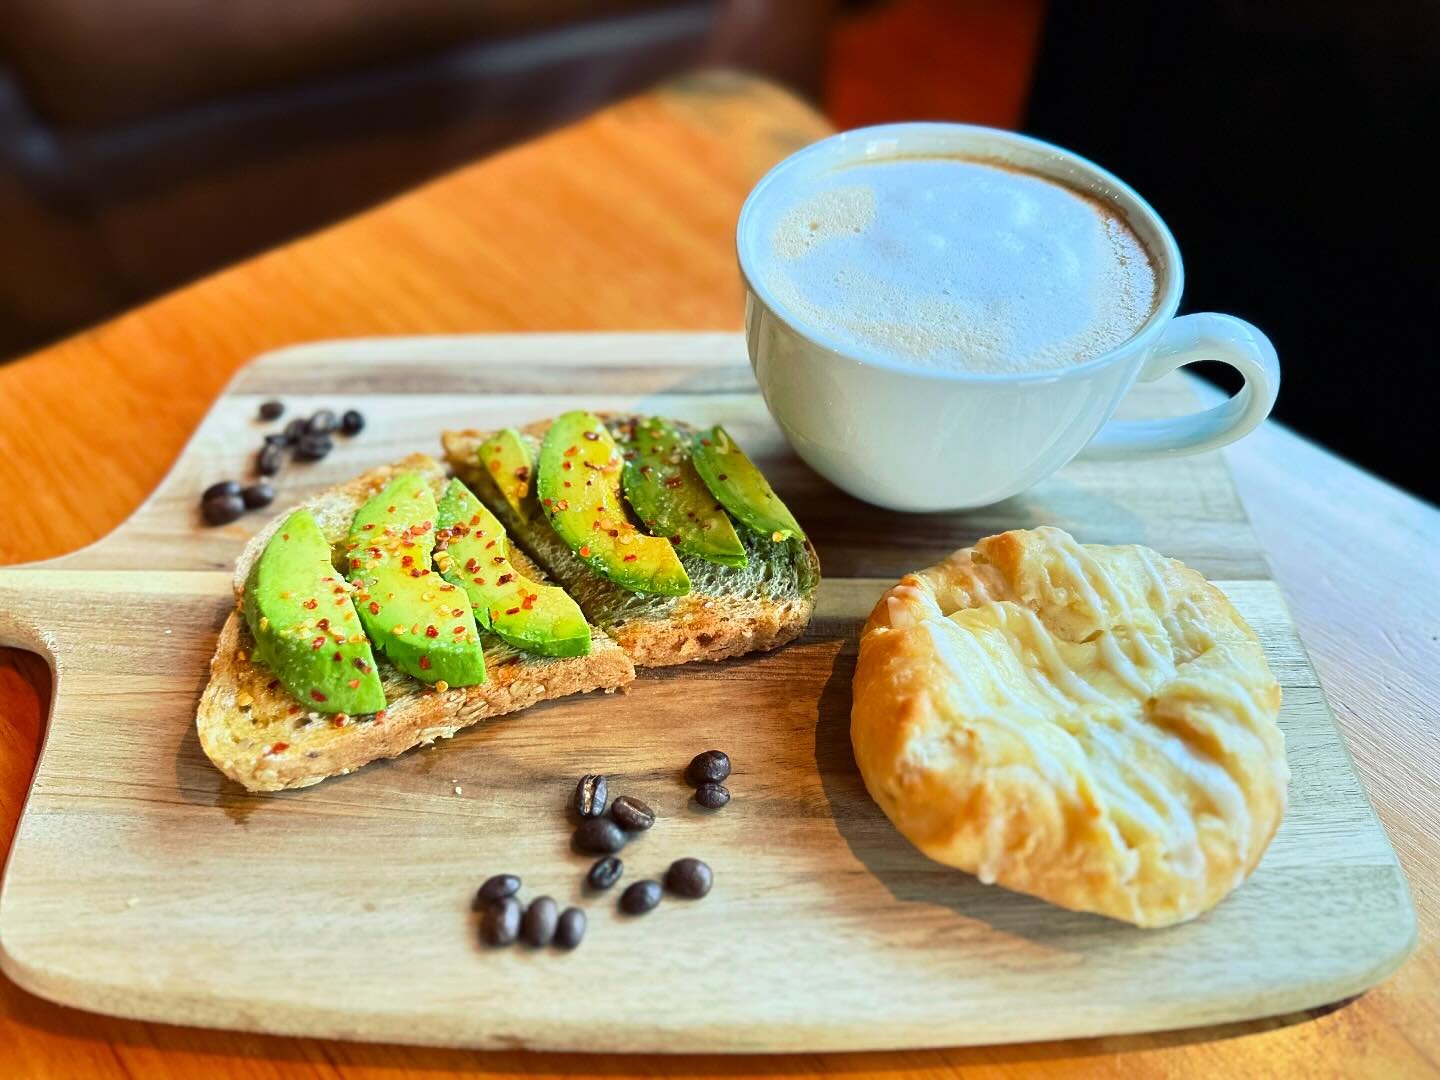 Happy Tuesday morning ☕️🥯🥑. Get out and enjoy this beautiful day #springtime #coffeetime #morningvibes #avocadotoast #danishpastry #breakfastideas